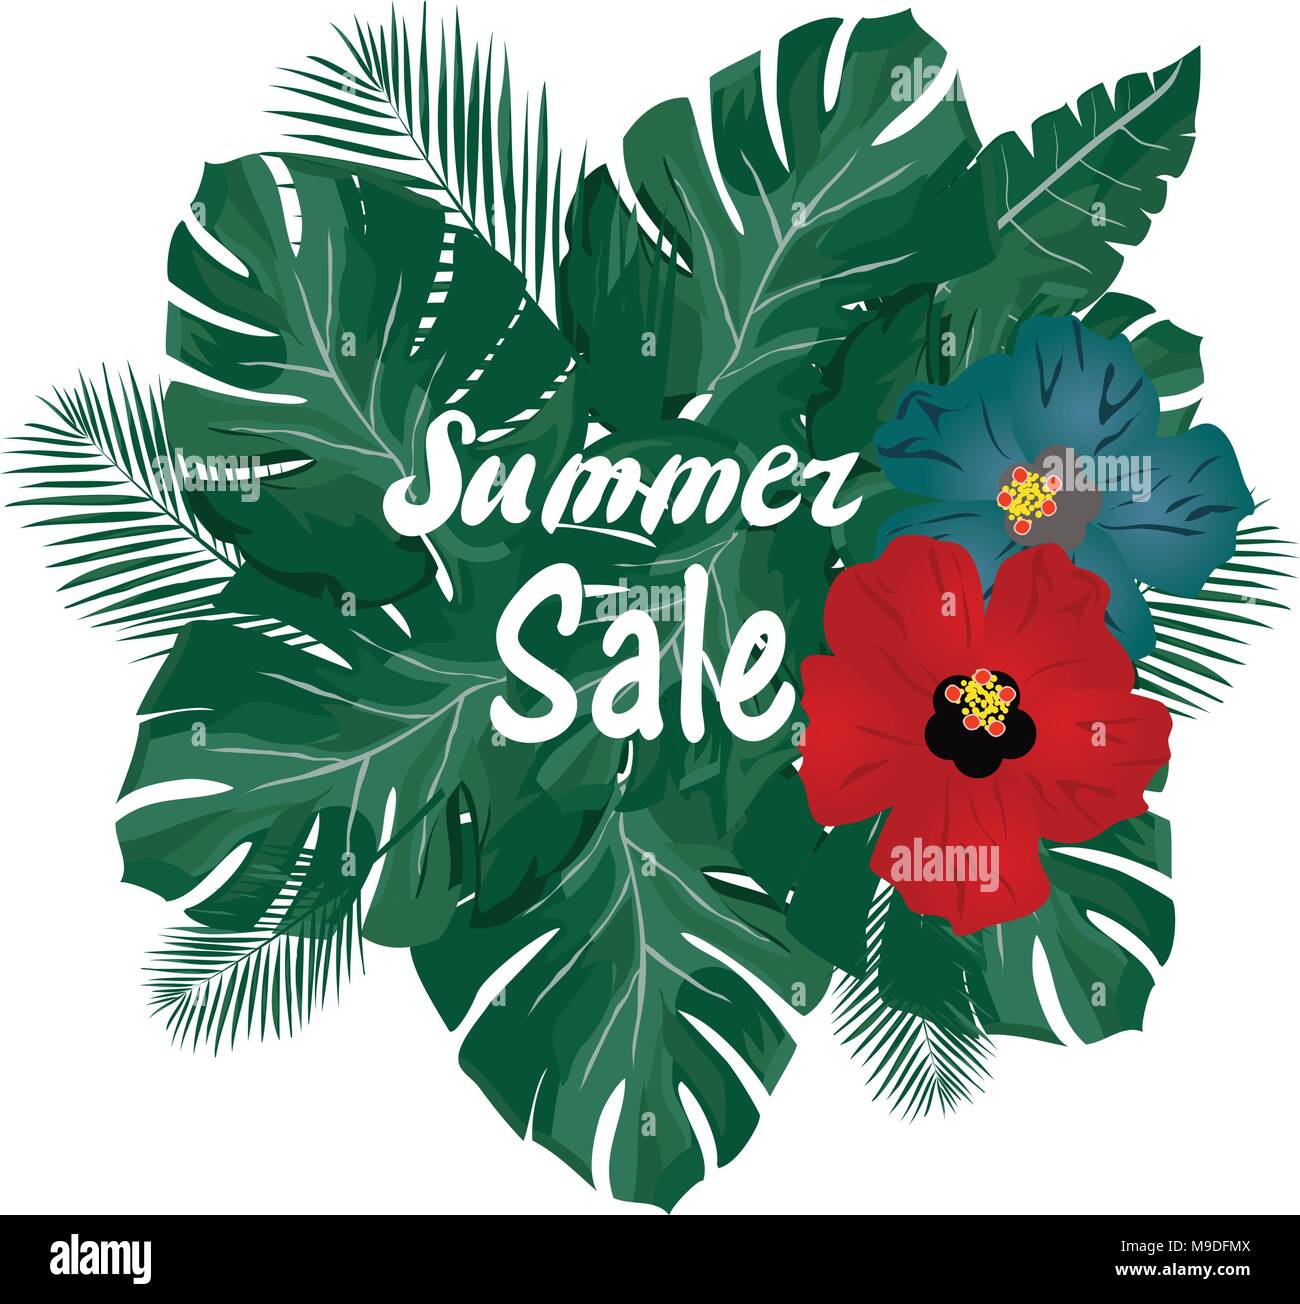 vector illustration of summer sale with palm leaves background Stock Vector